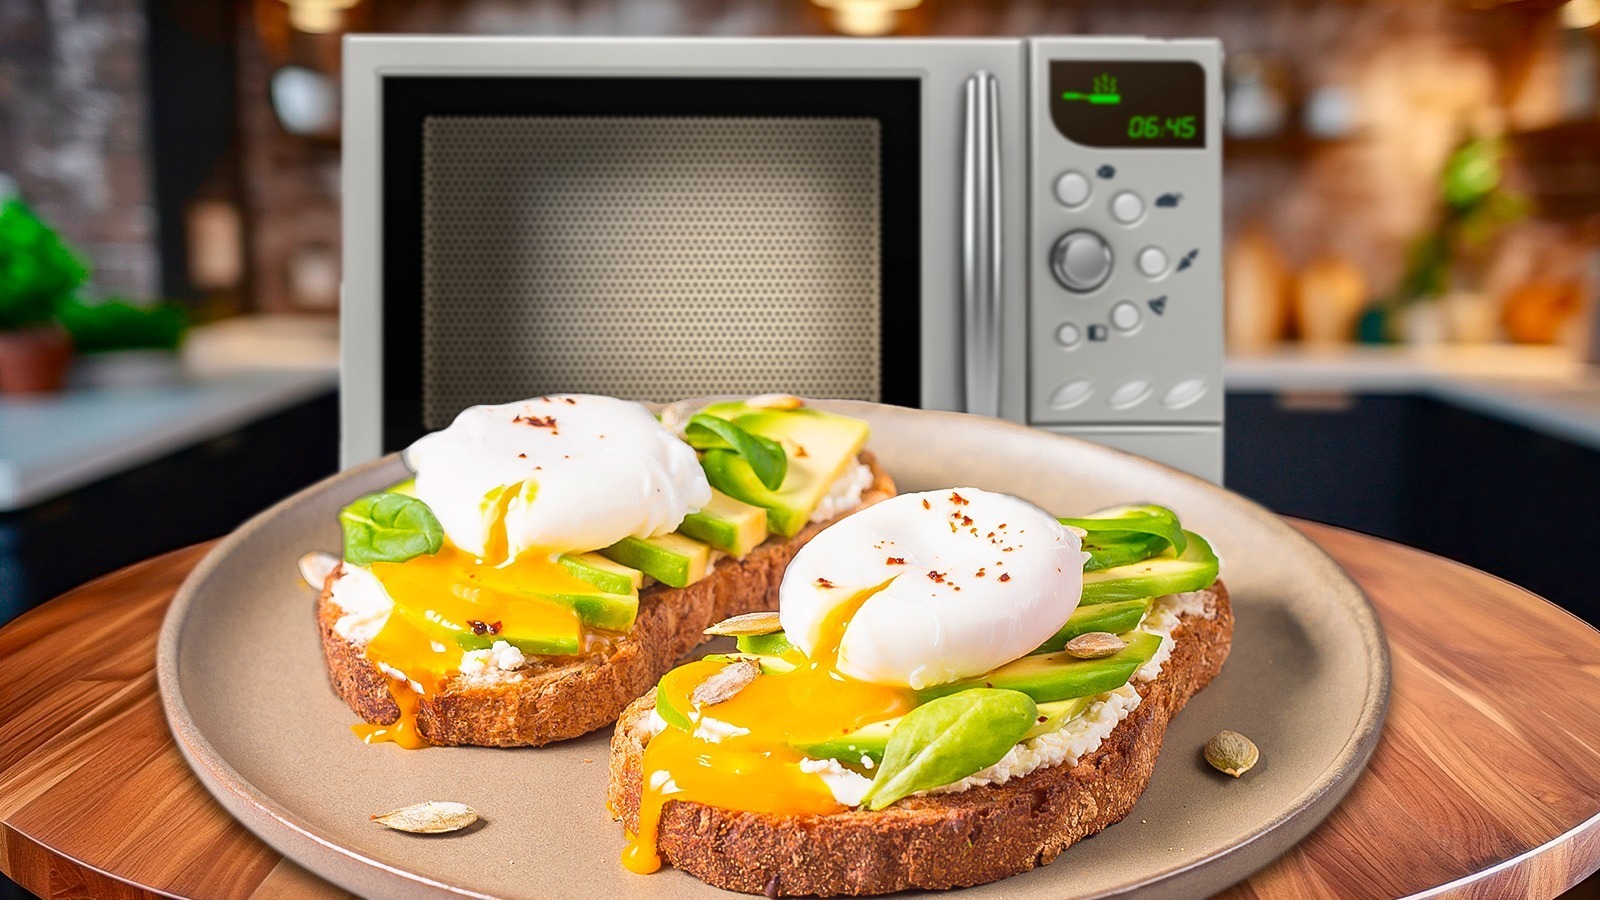 https://www.tastingtable.com/img/gallery/hack-the-intimidating-process-of-poaching-eggs-with-your-microwave/l-intro-1702586648.jpg